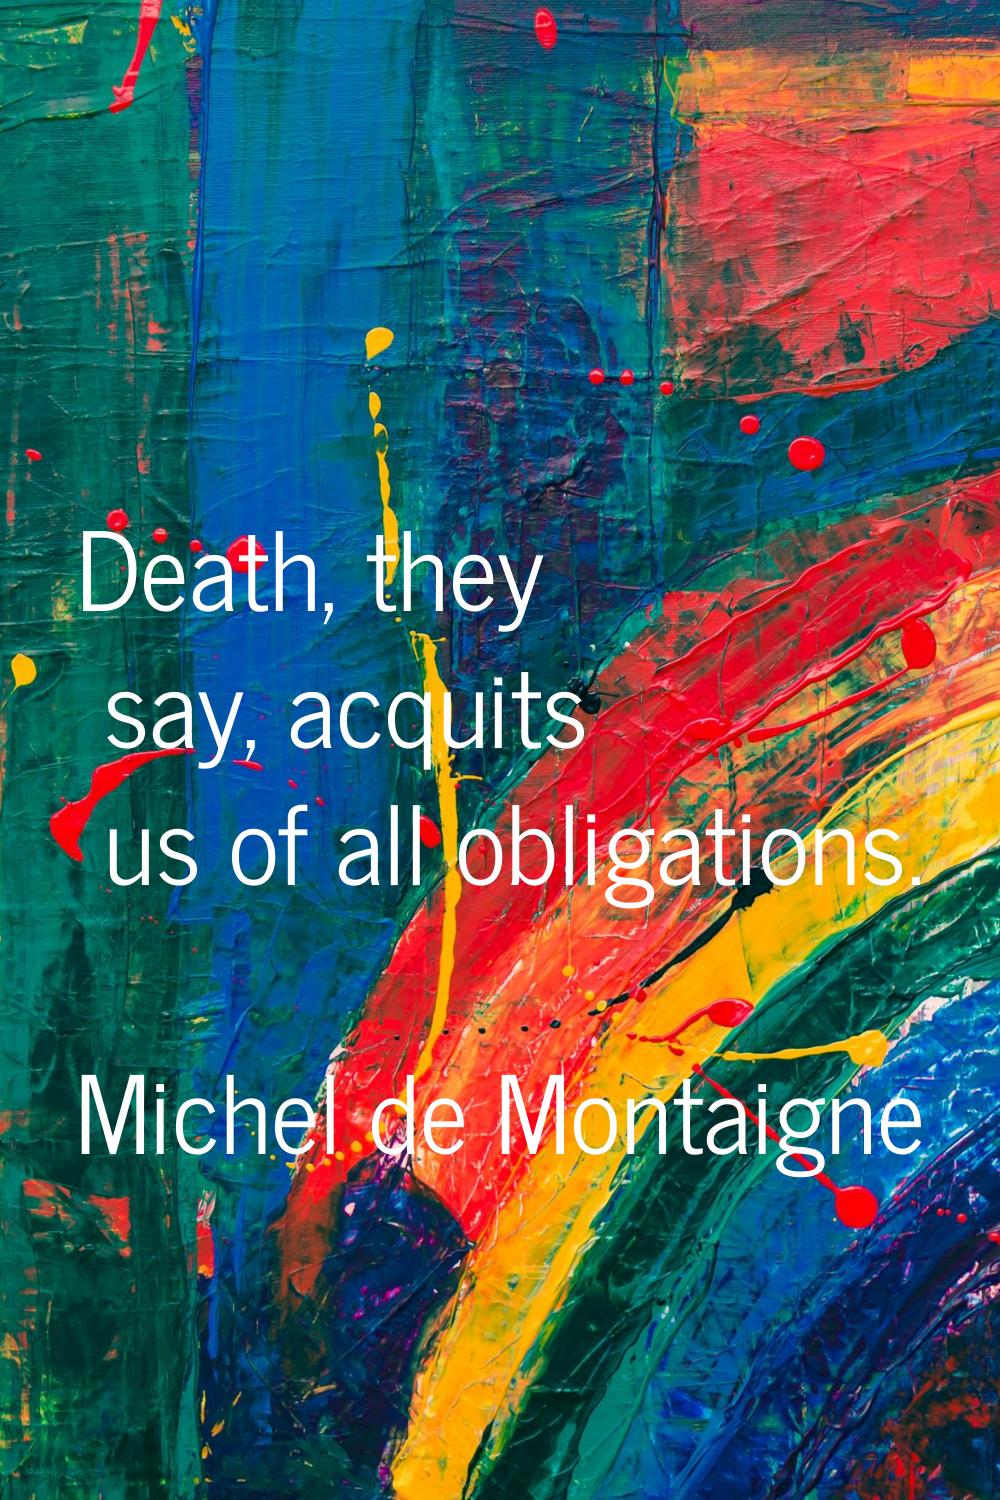 Death, they say, acquits us of all obligations.